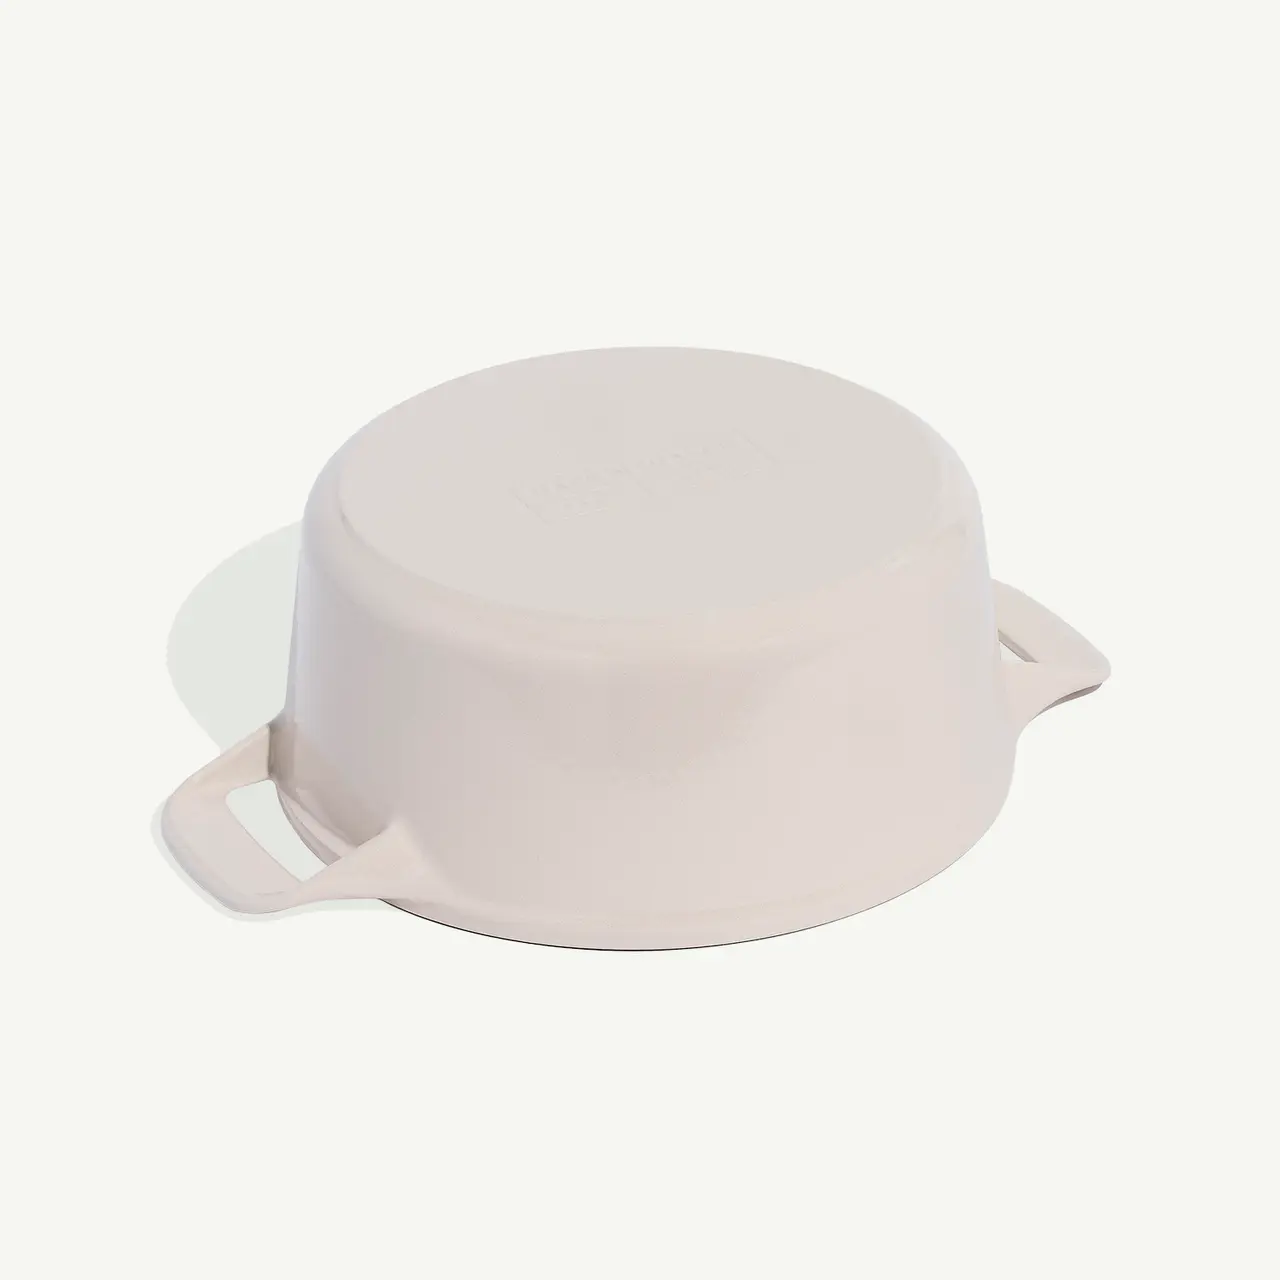 A pale pink ceramic pot with handles and a visible brand name on the lid, isolated against a white background.